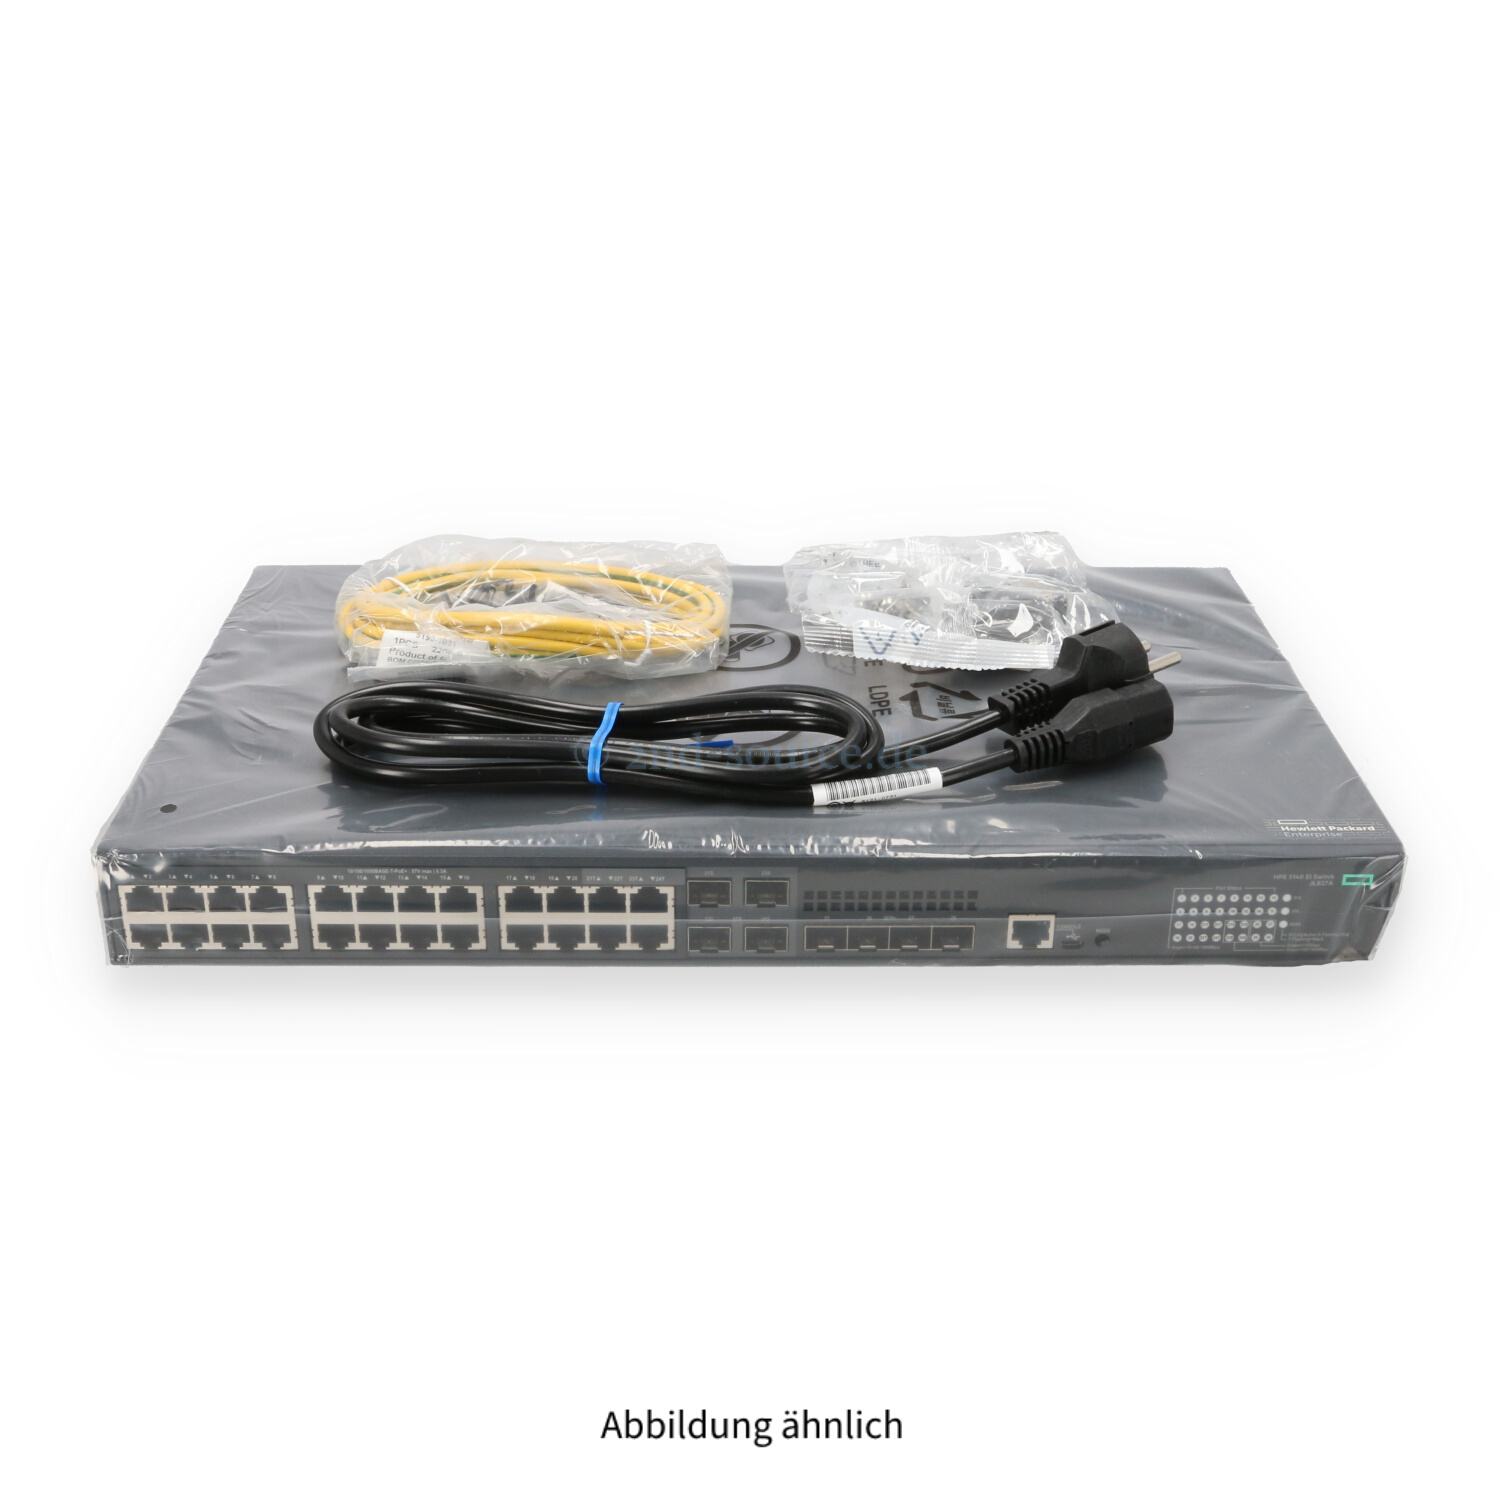 HPE FlexNetwork 5140-24G-SFP+ 24x 1GbE PoE+ 4x Dual-Personality 1GbE 4x SFP+ 10GbE Managed Switch JL827A JL827-61001